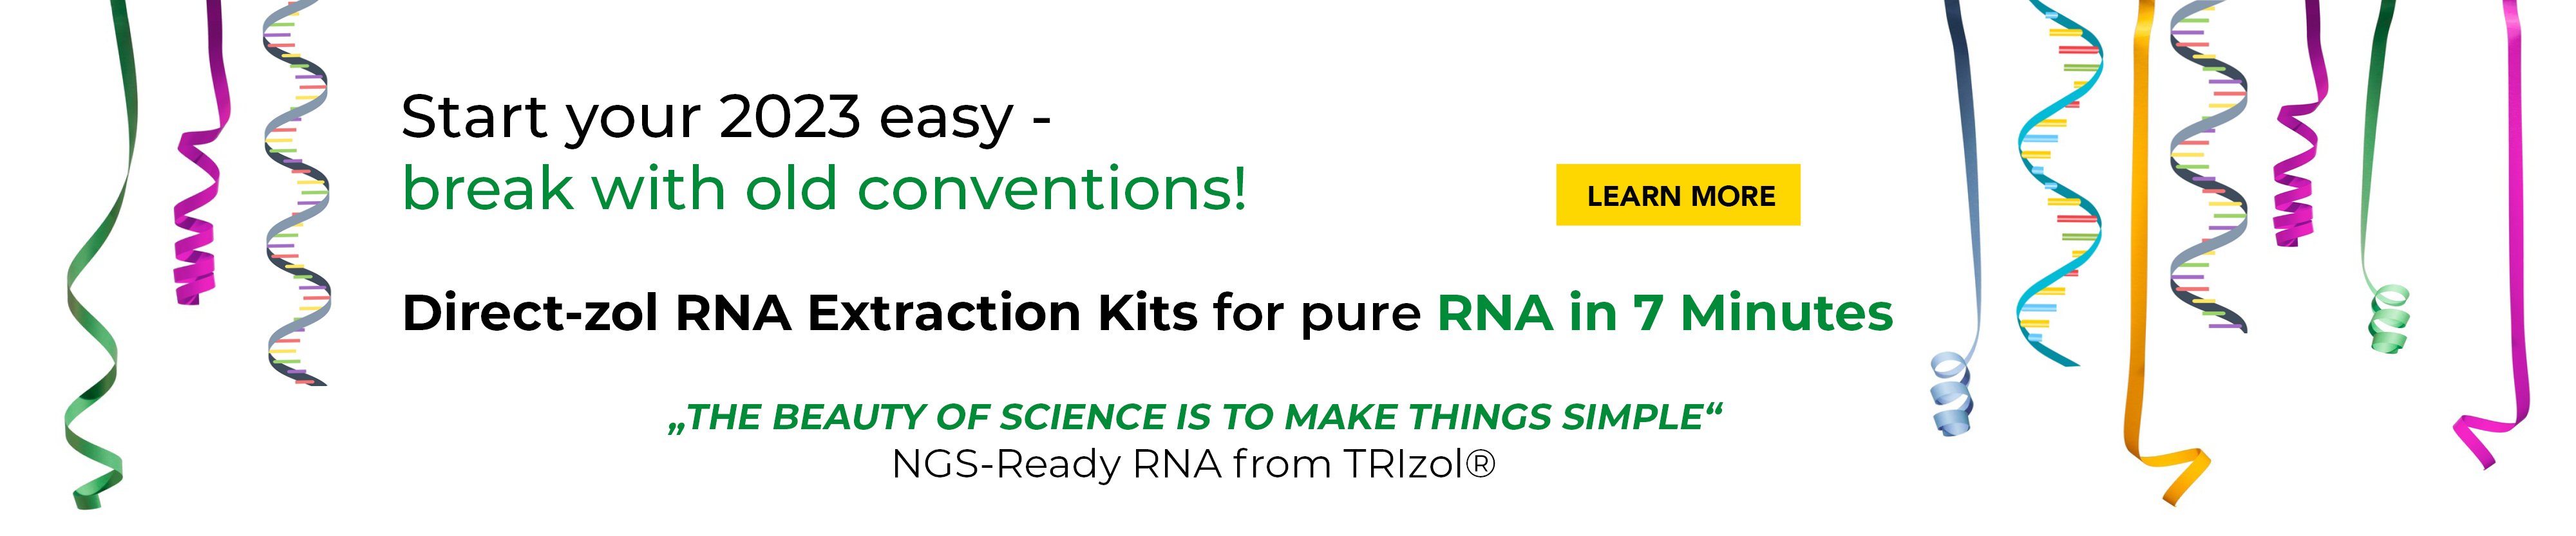 Banner for Direct-zol RNA Extraction Kits 2023